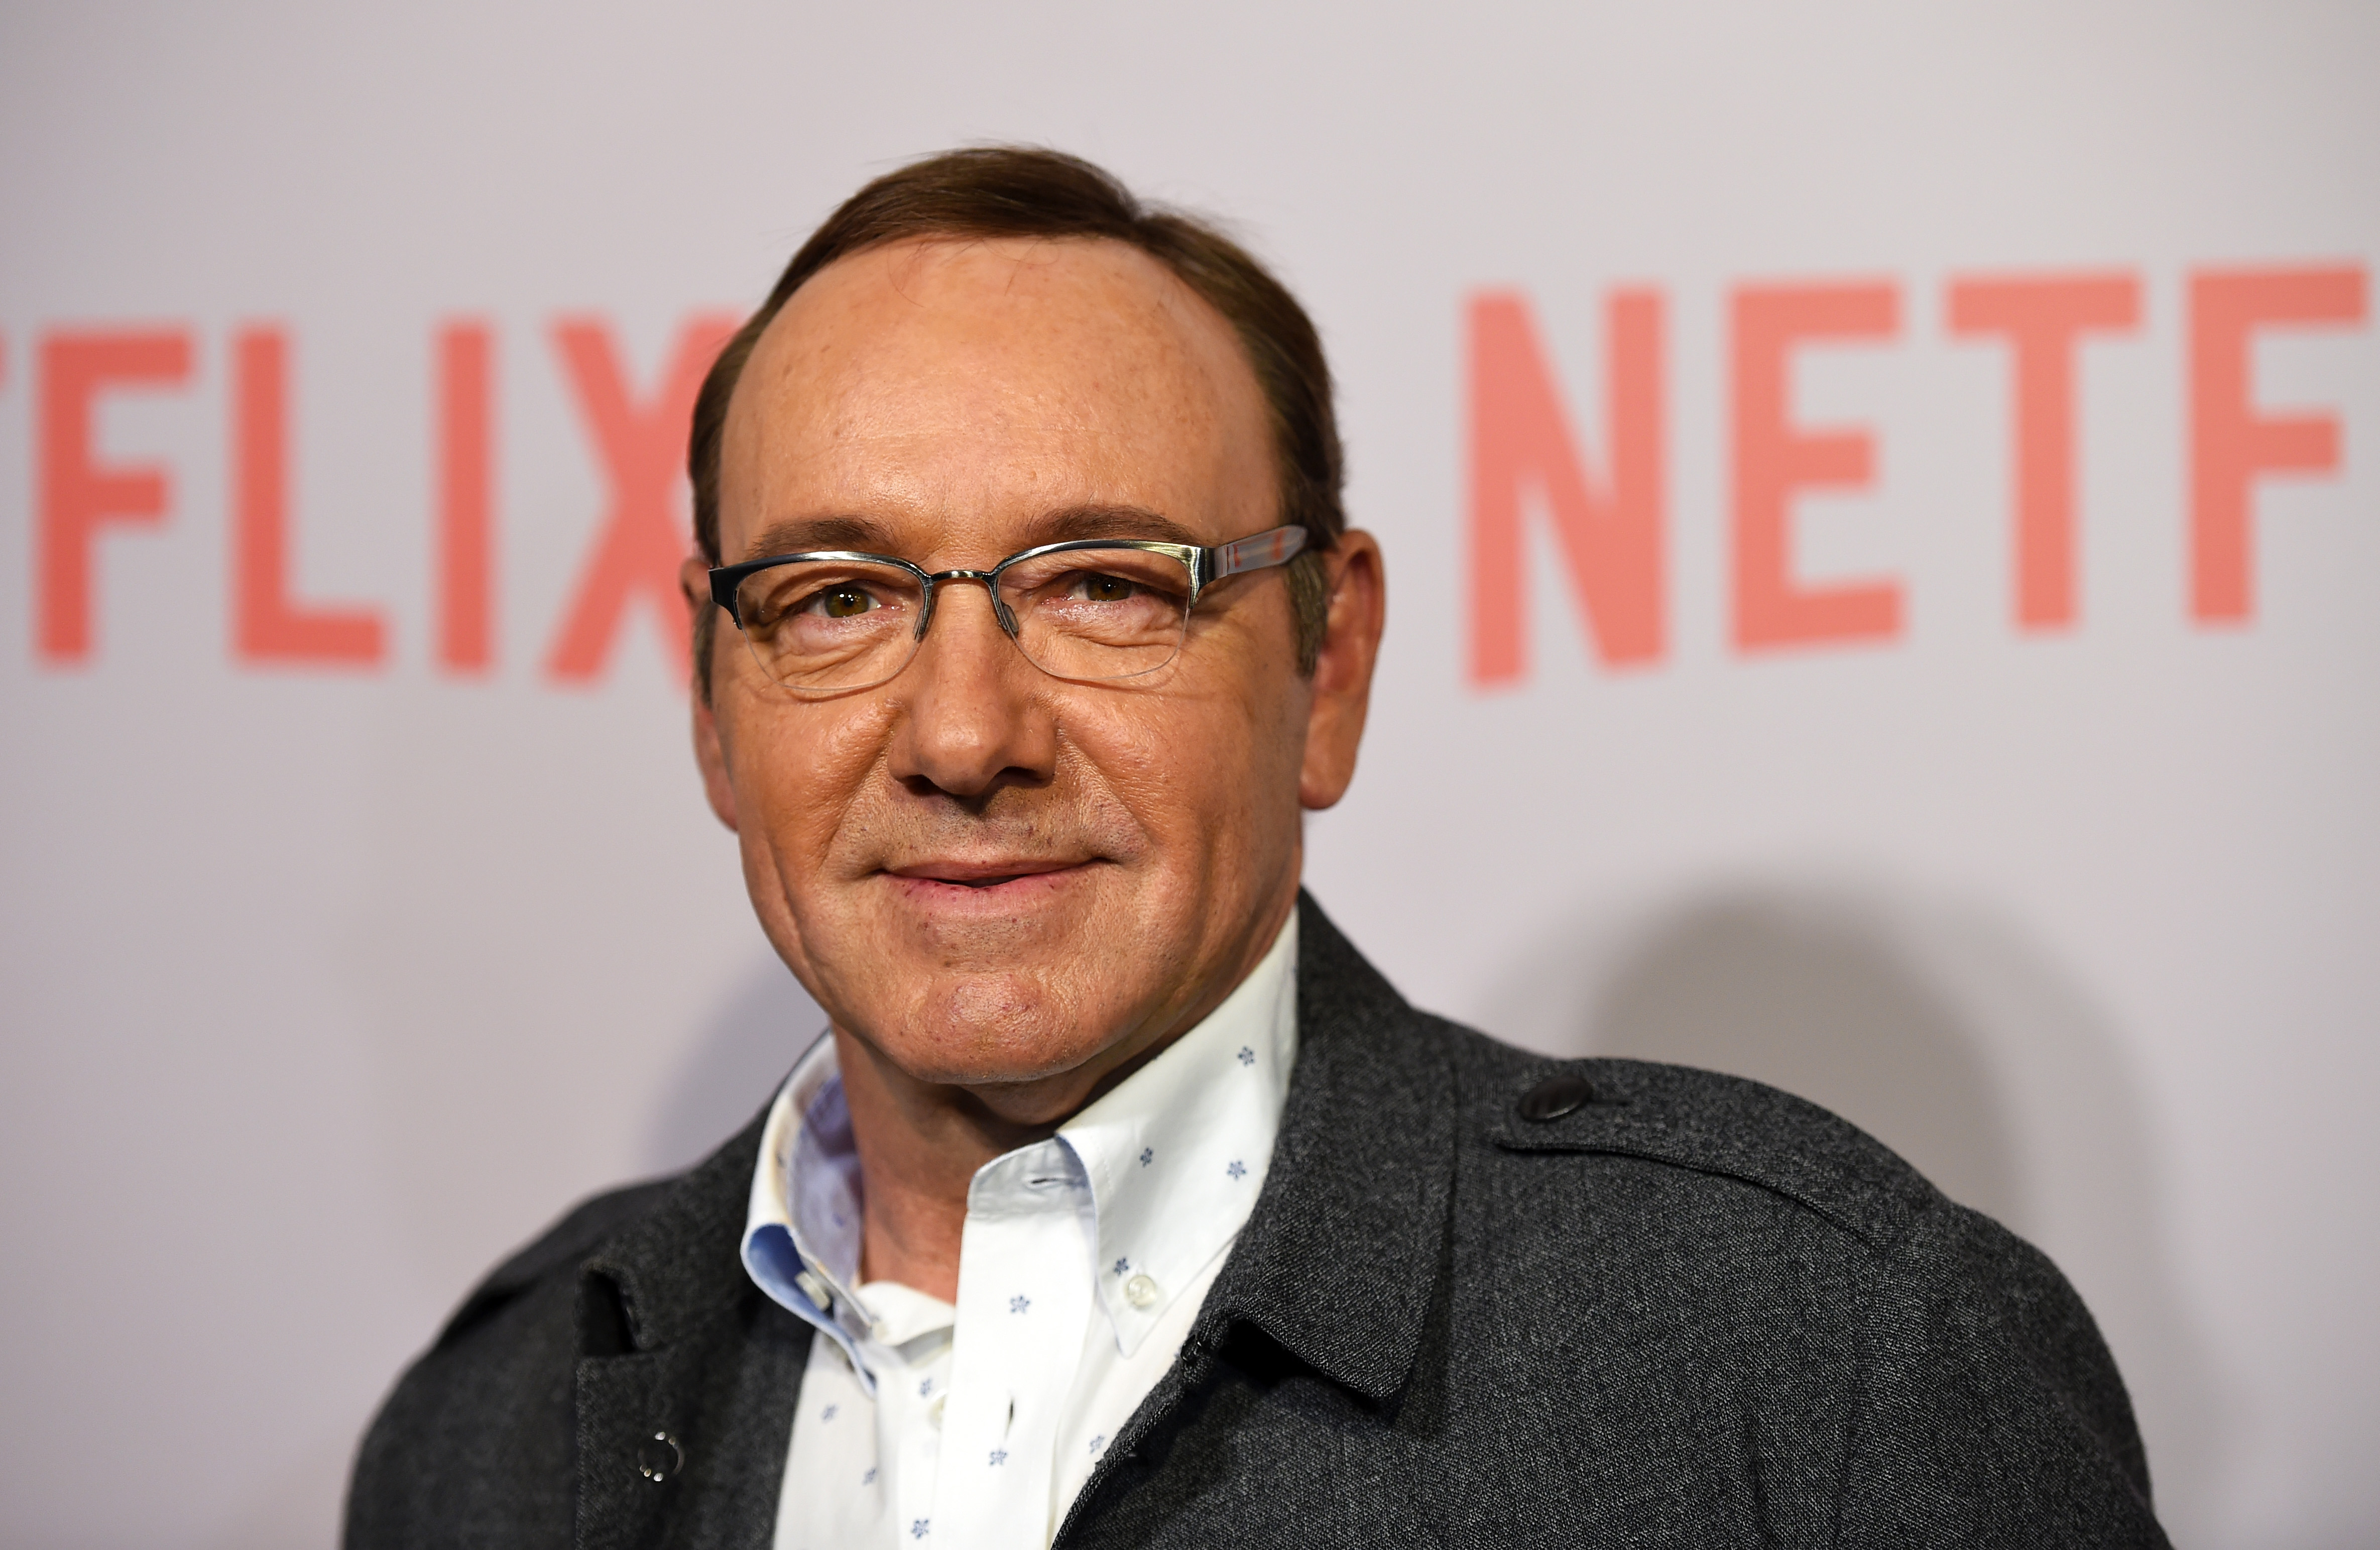 Kevin Spacey attends Netflix's "House Of Cards" Q&A screening event at the Samuel Goldwyn Theater on April 27, 2015, in Beverly Hills, California. | Source: Getty Images